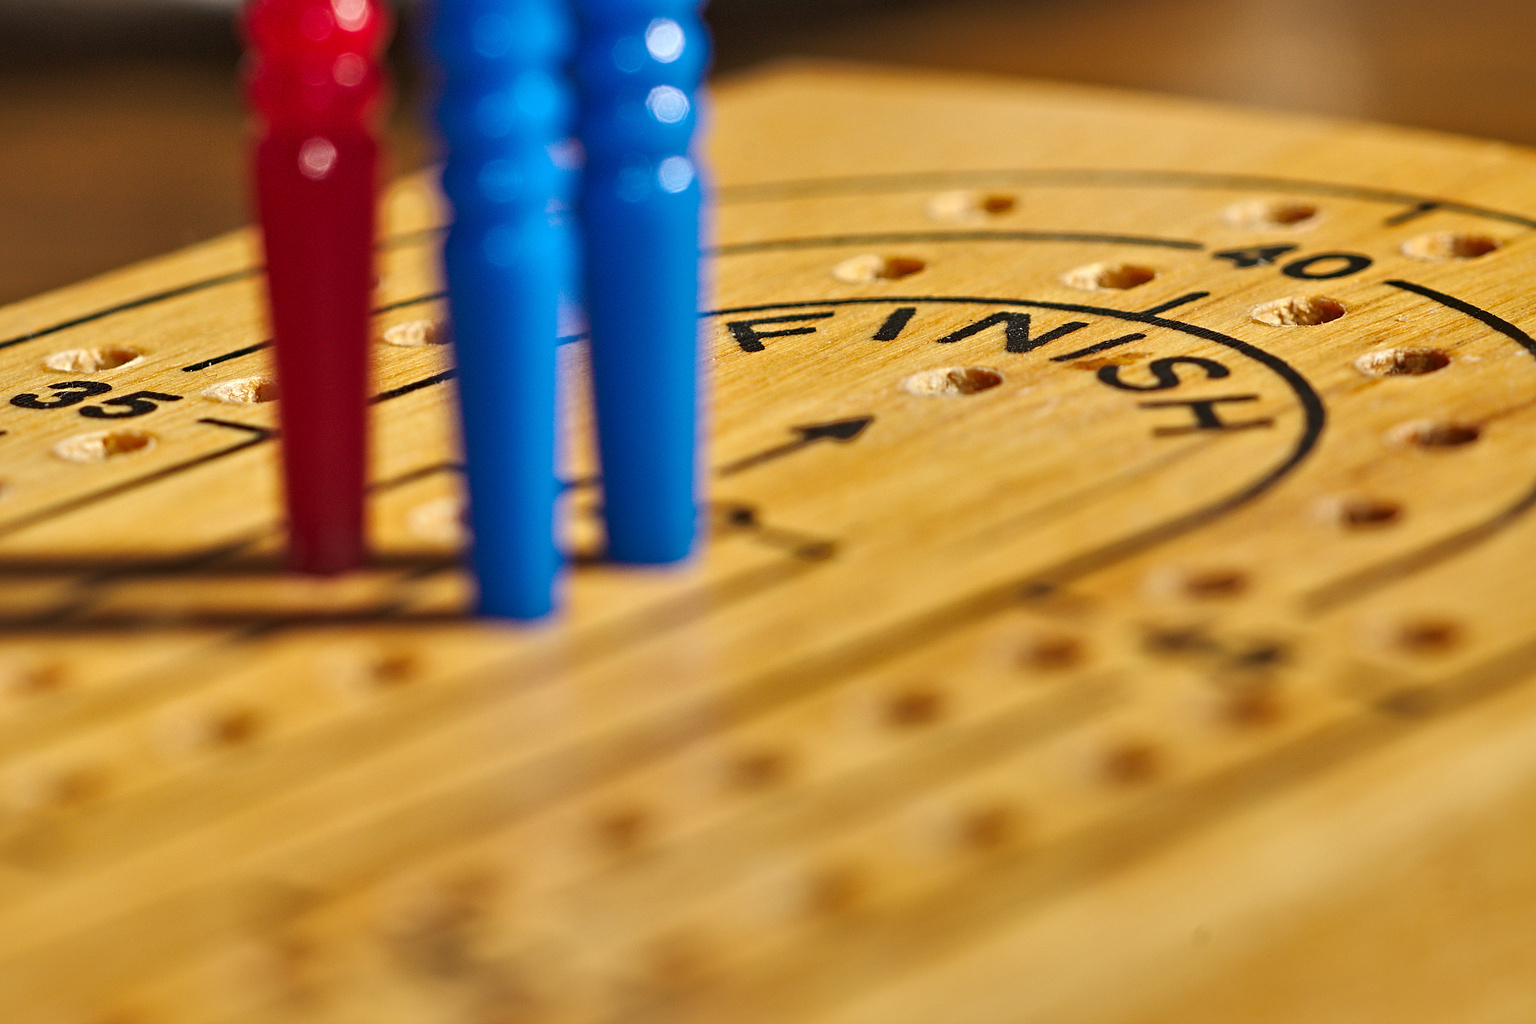 How To Play Cribbage? A Beginner's Guide